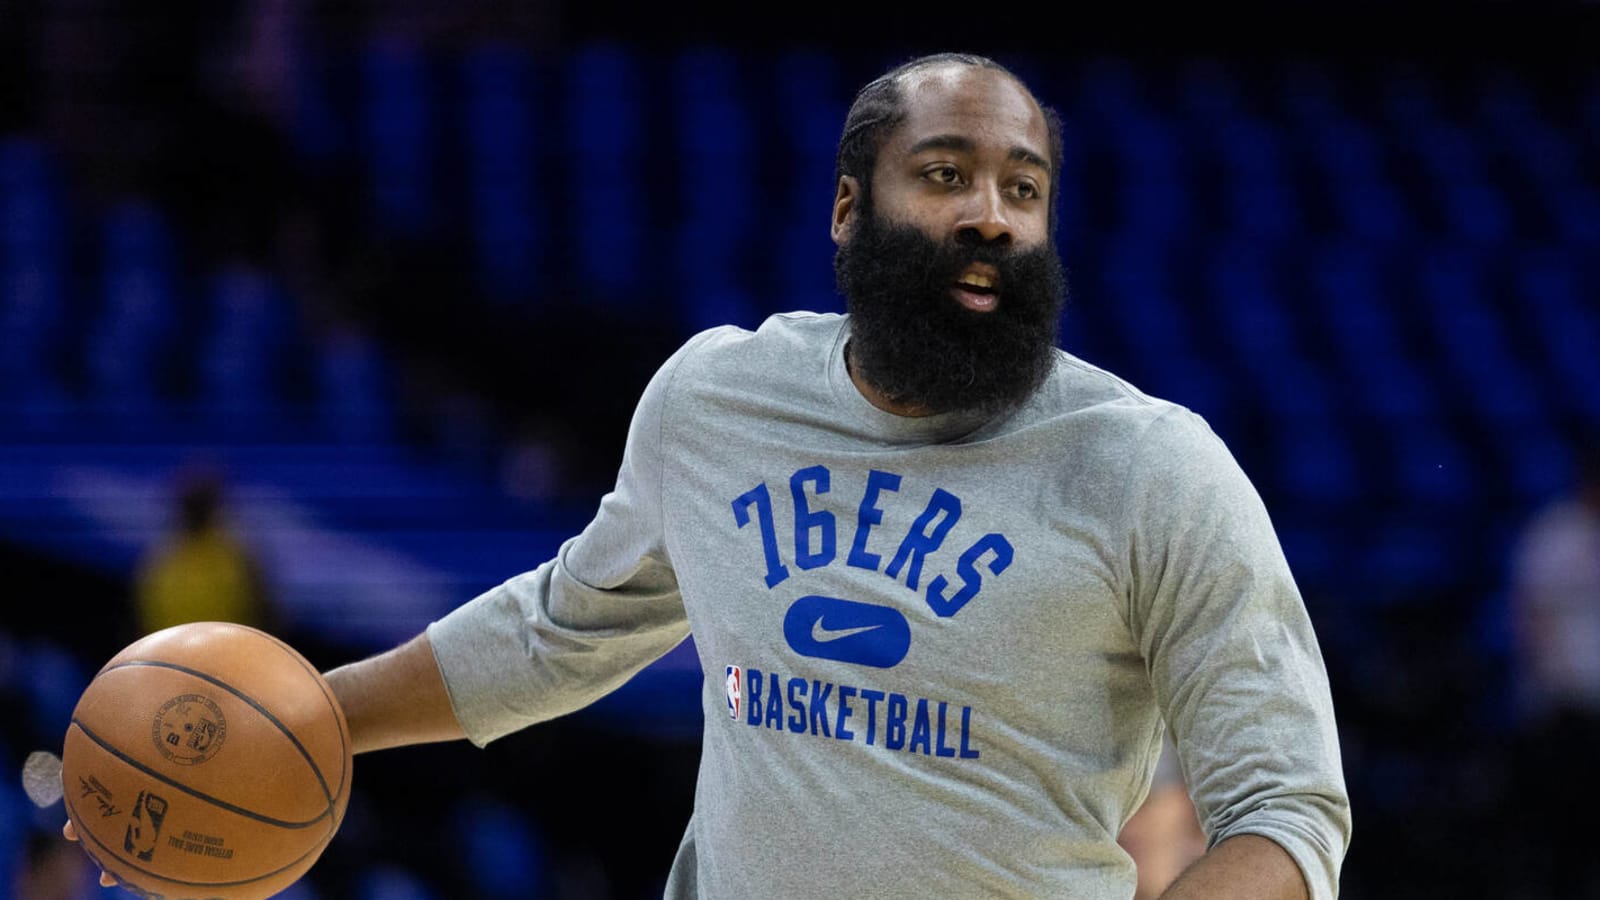 James Harden could have to take pay cut in contract extension with 76ers, says NBA insider